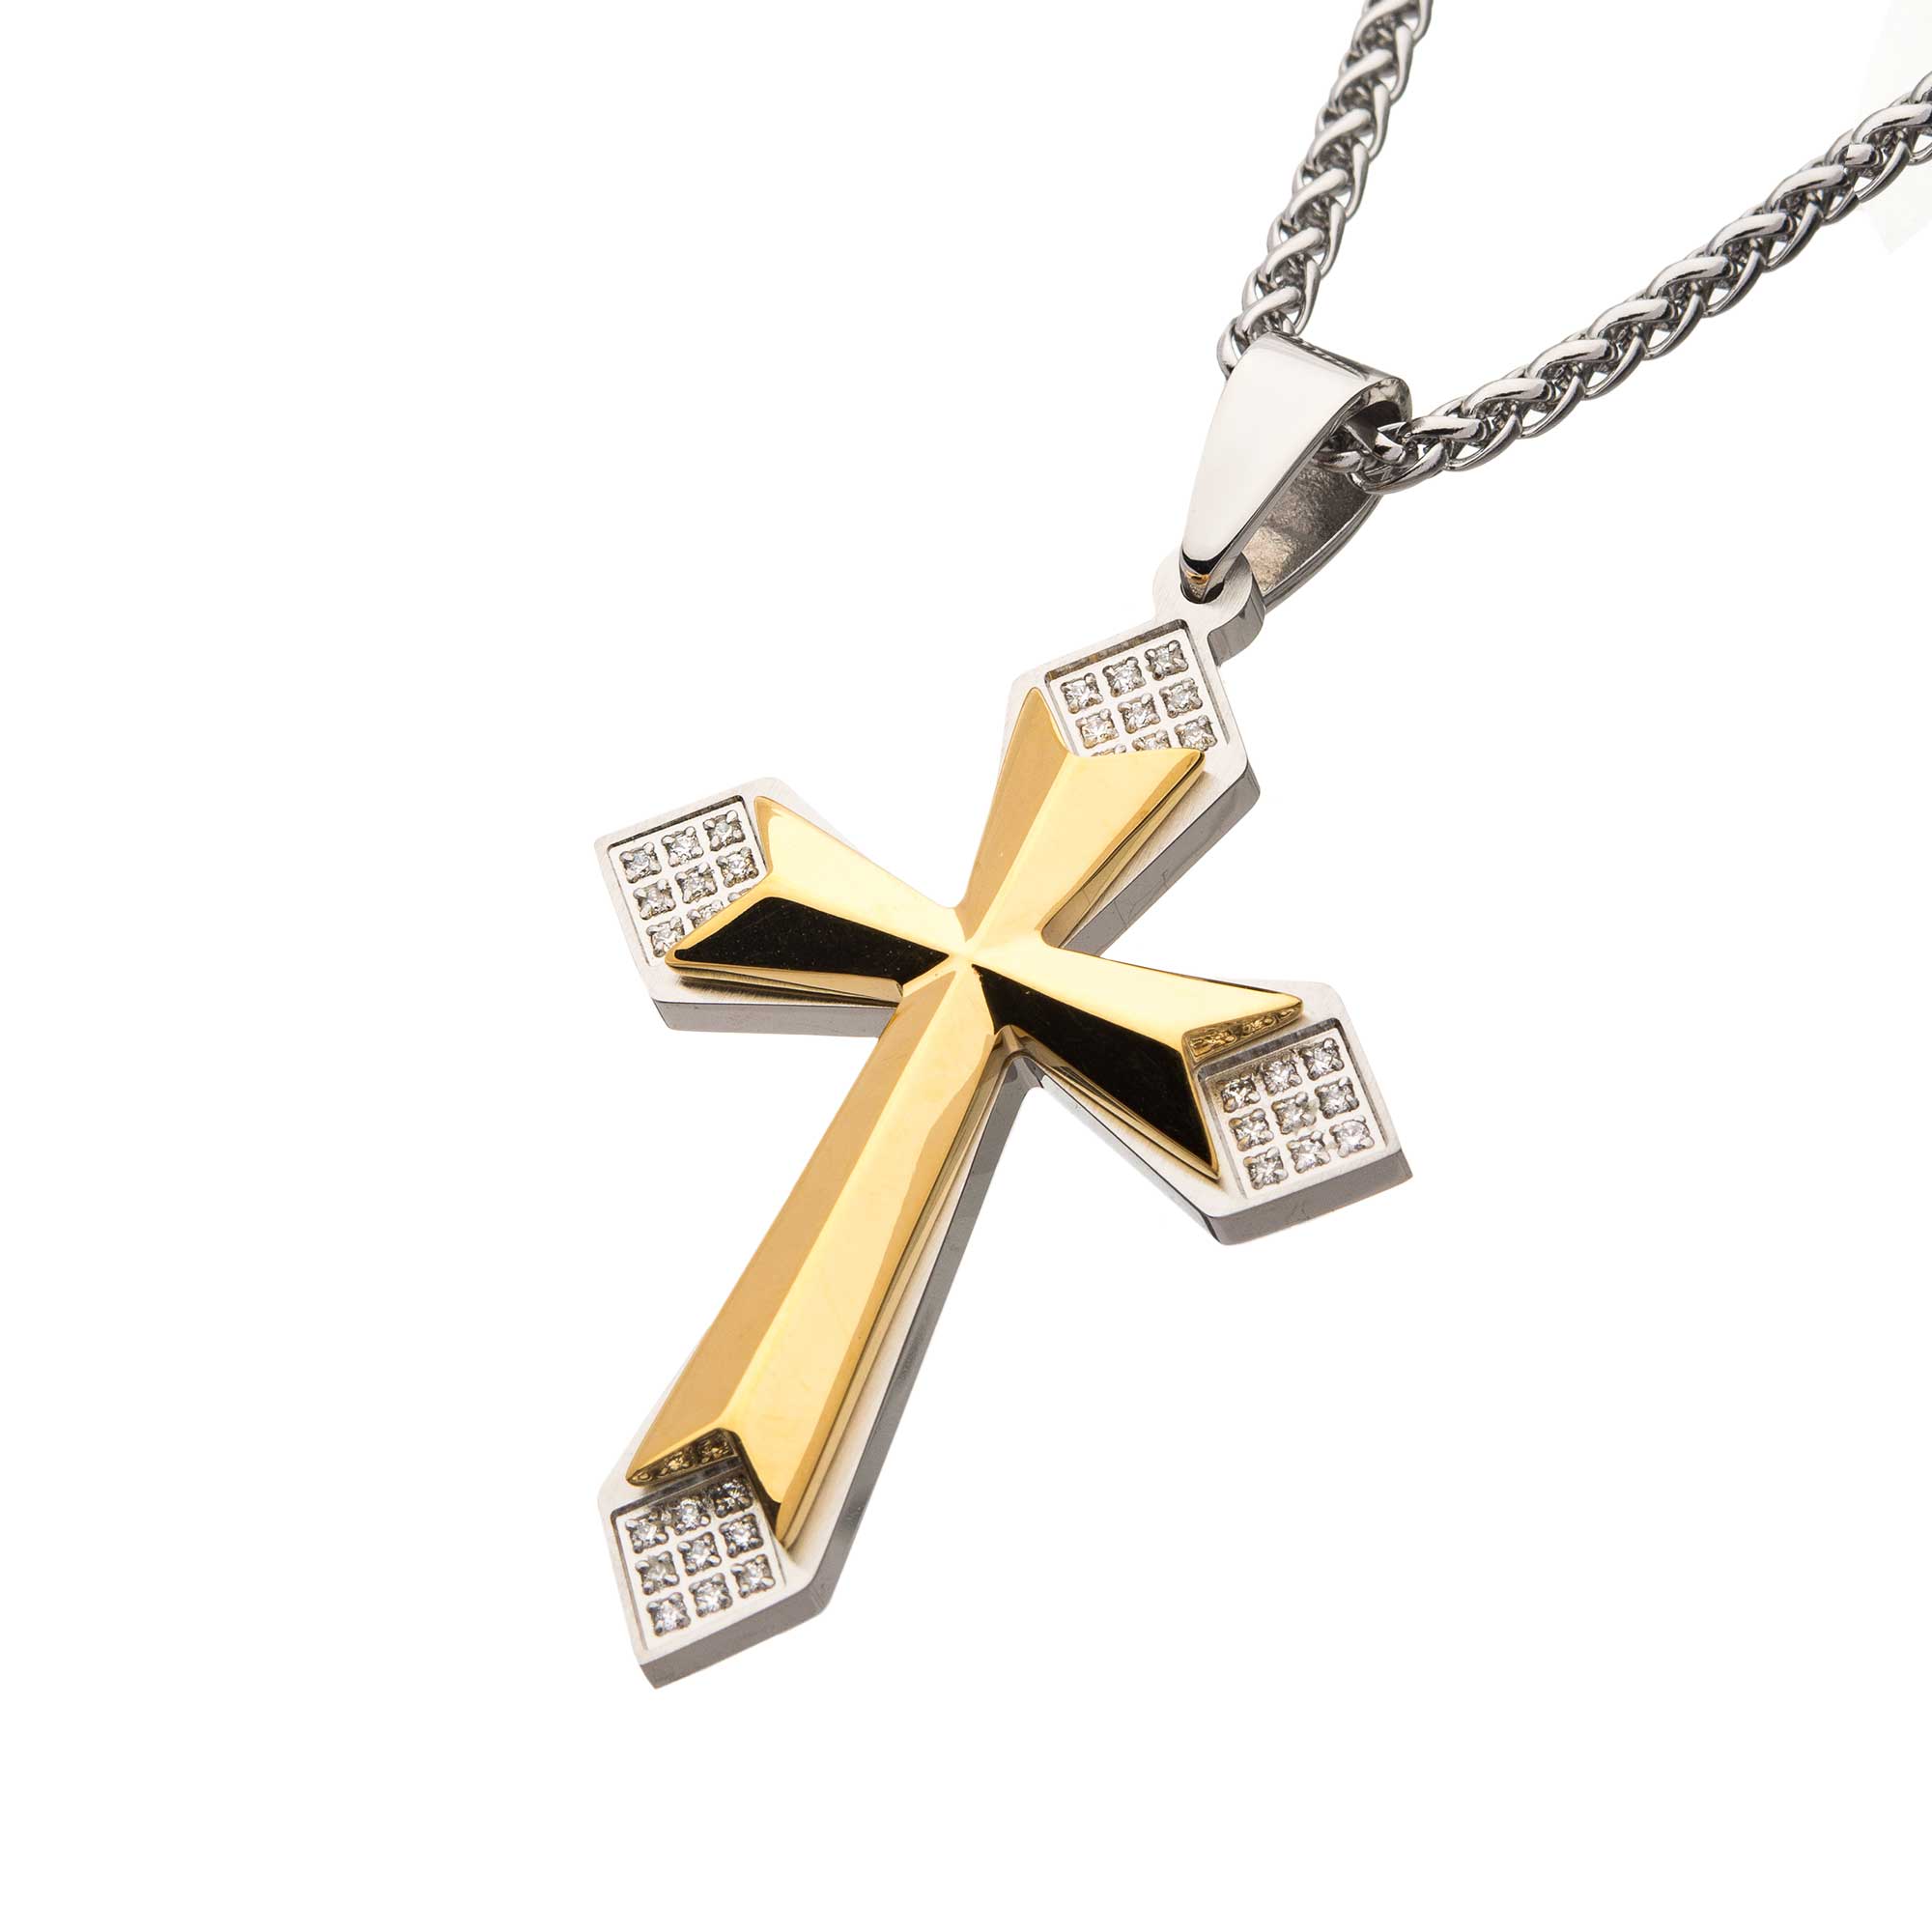 Gold Plated Cross with 36pcs CNC Prong Set Clear CZ Pendant with Steel Wheat Chain Image 2 Morin Jewelers Southbridge, MA